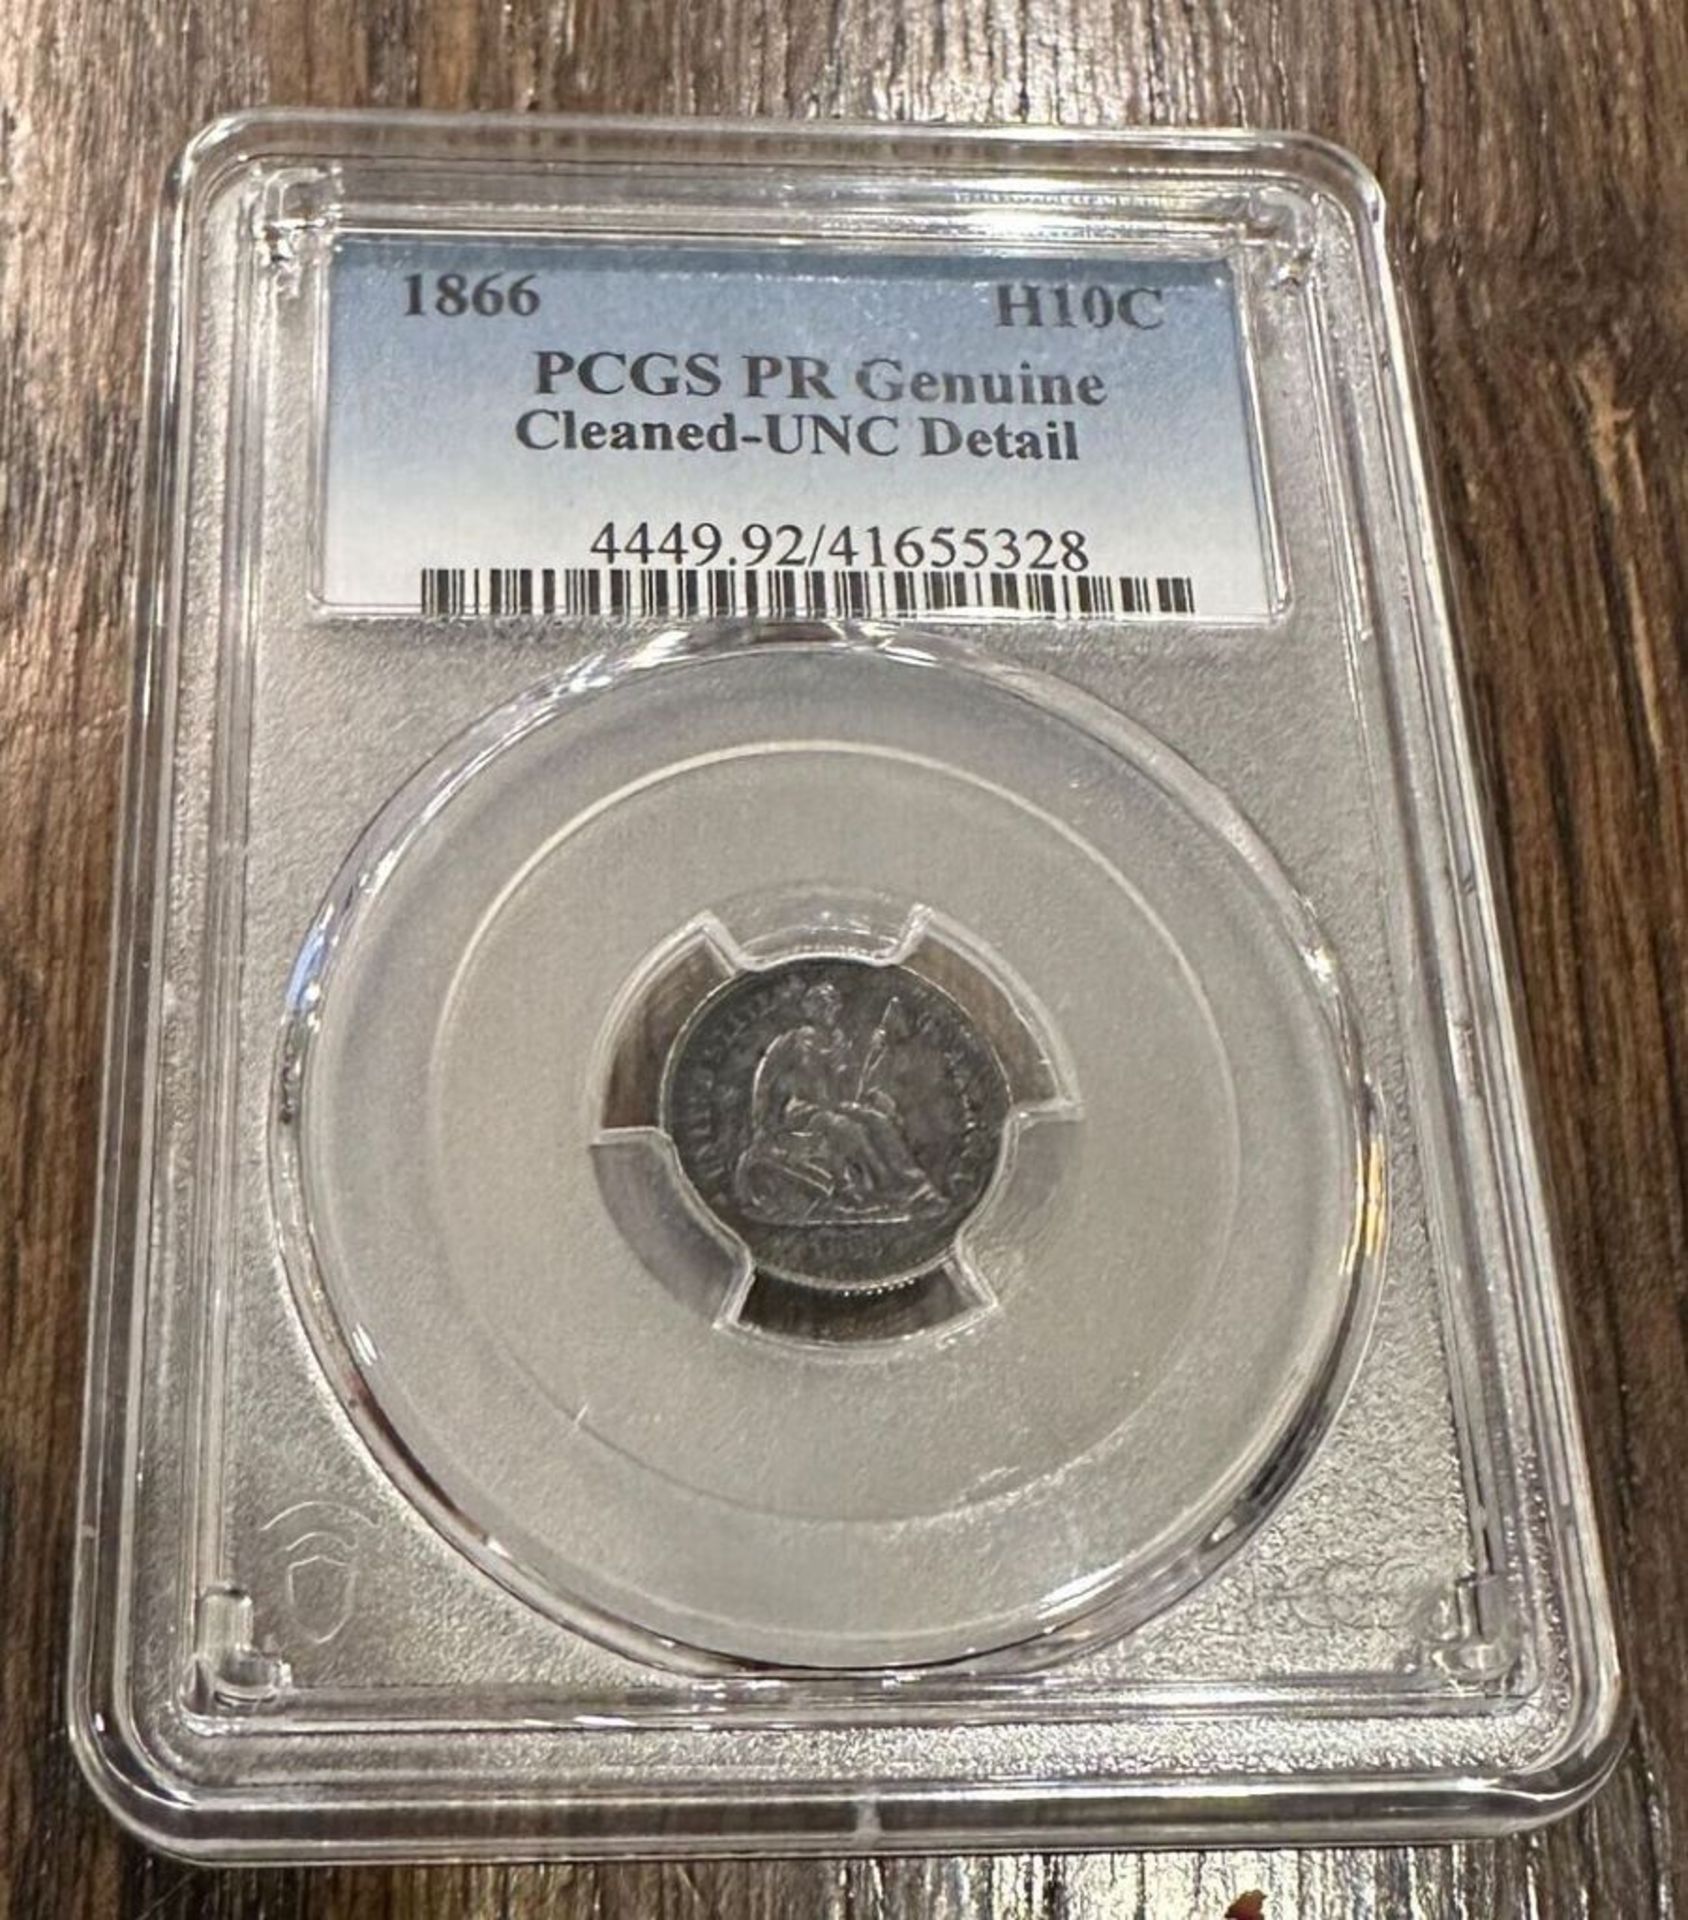 PCGS PR GENUINE CLEANED-UNC DETAIL 1866 H10C COIN